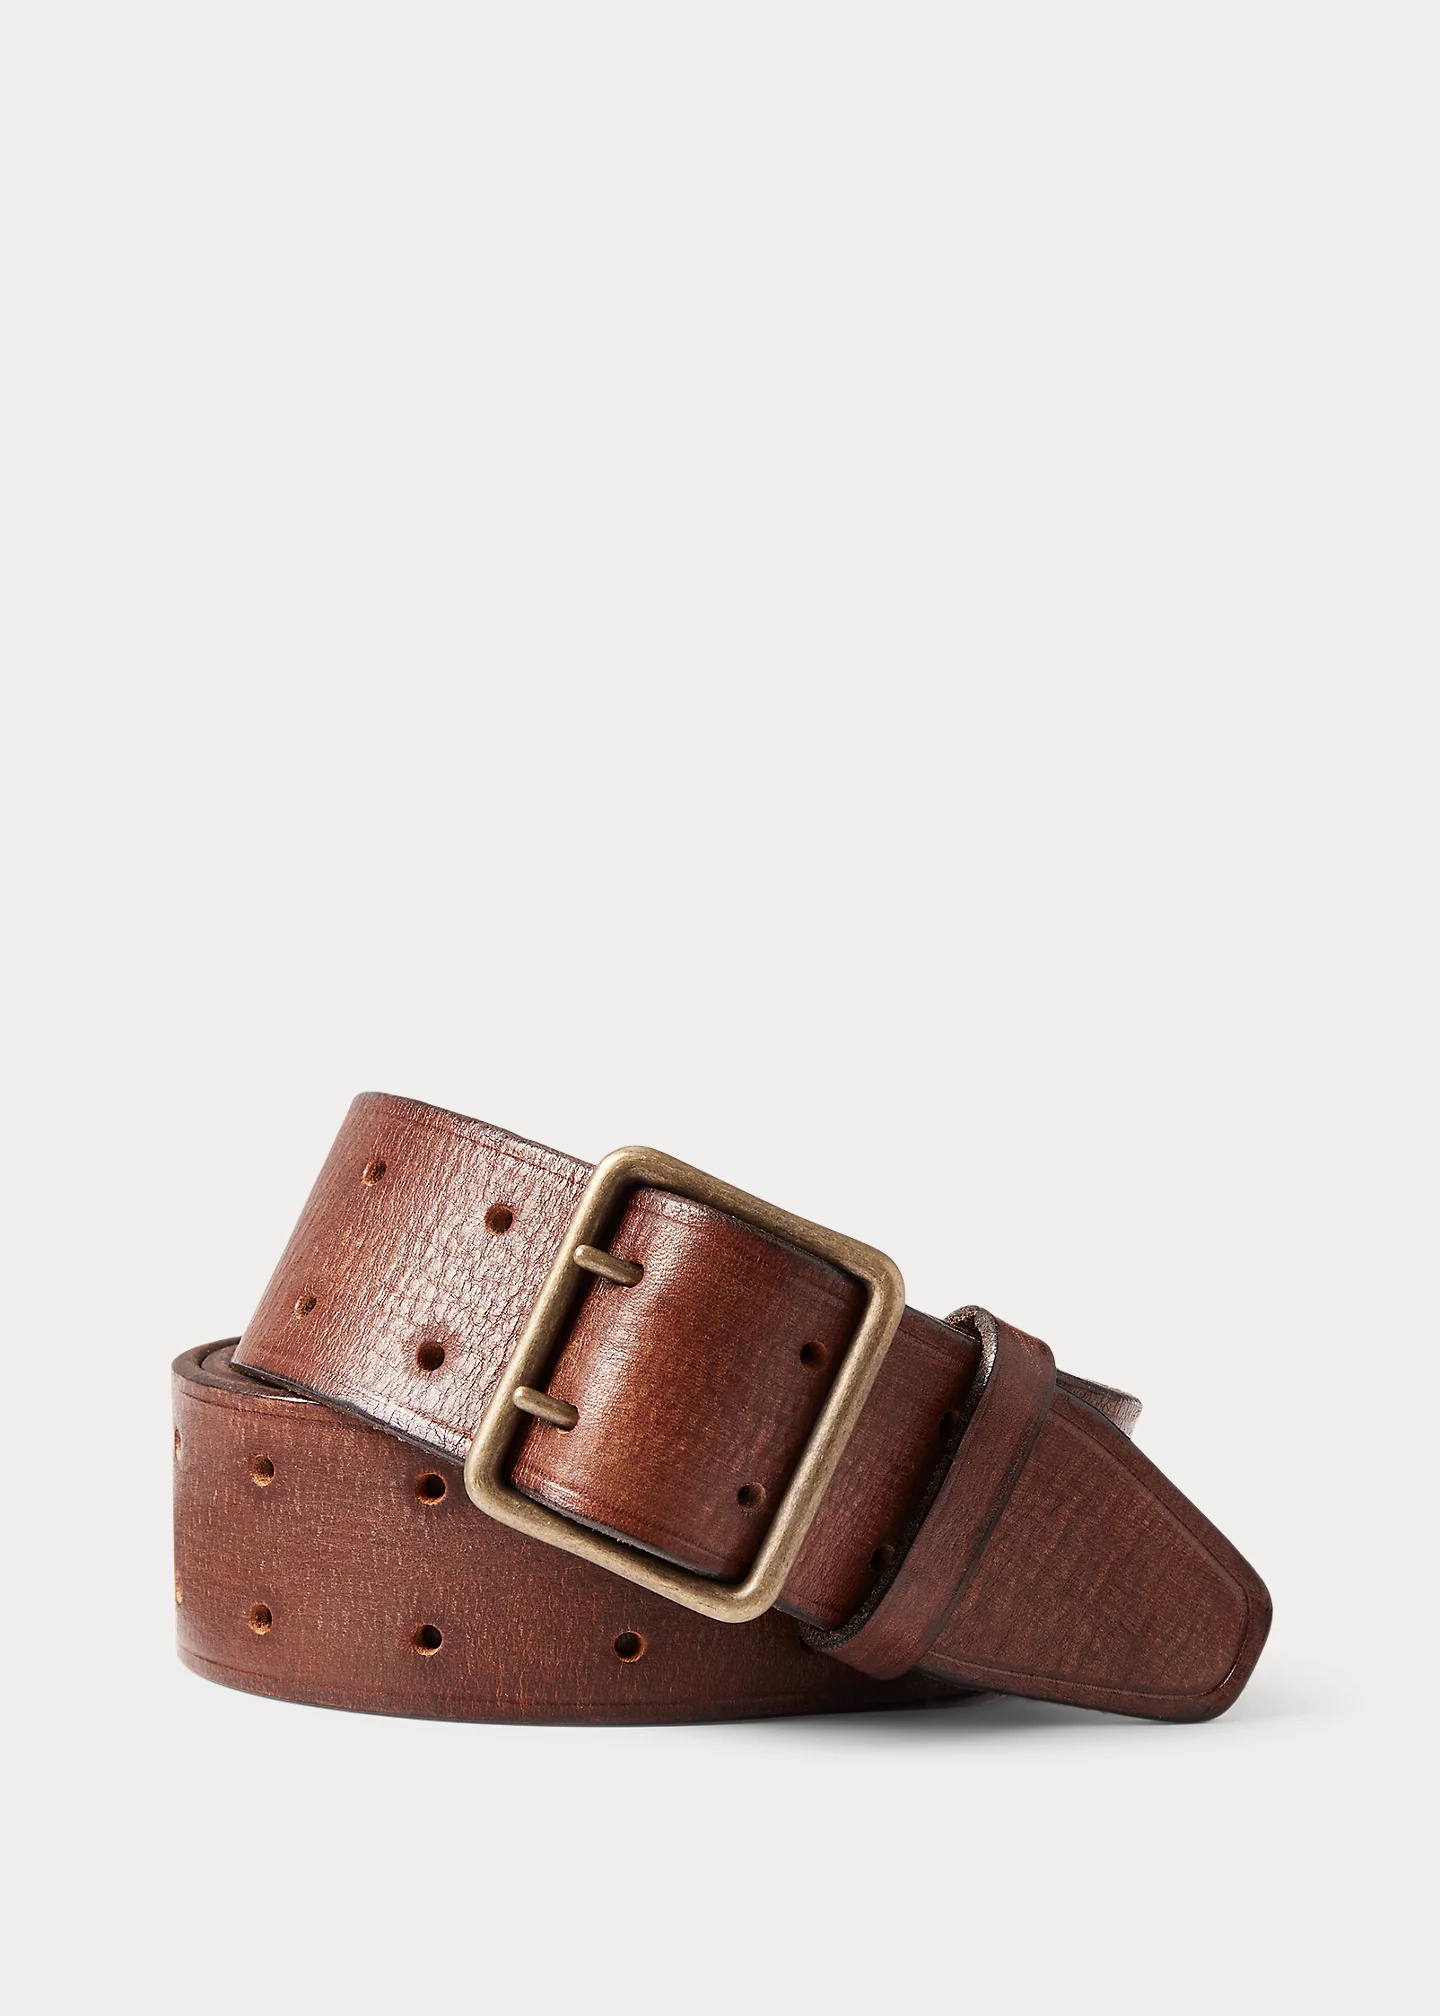 Leather Double-Prong Belt - 1